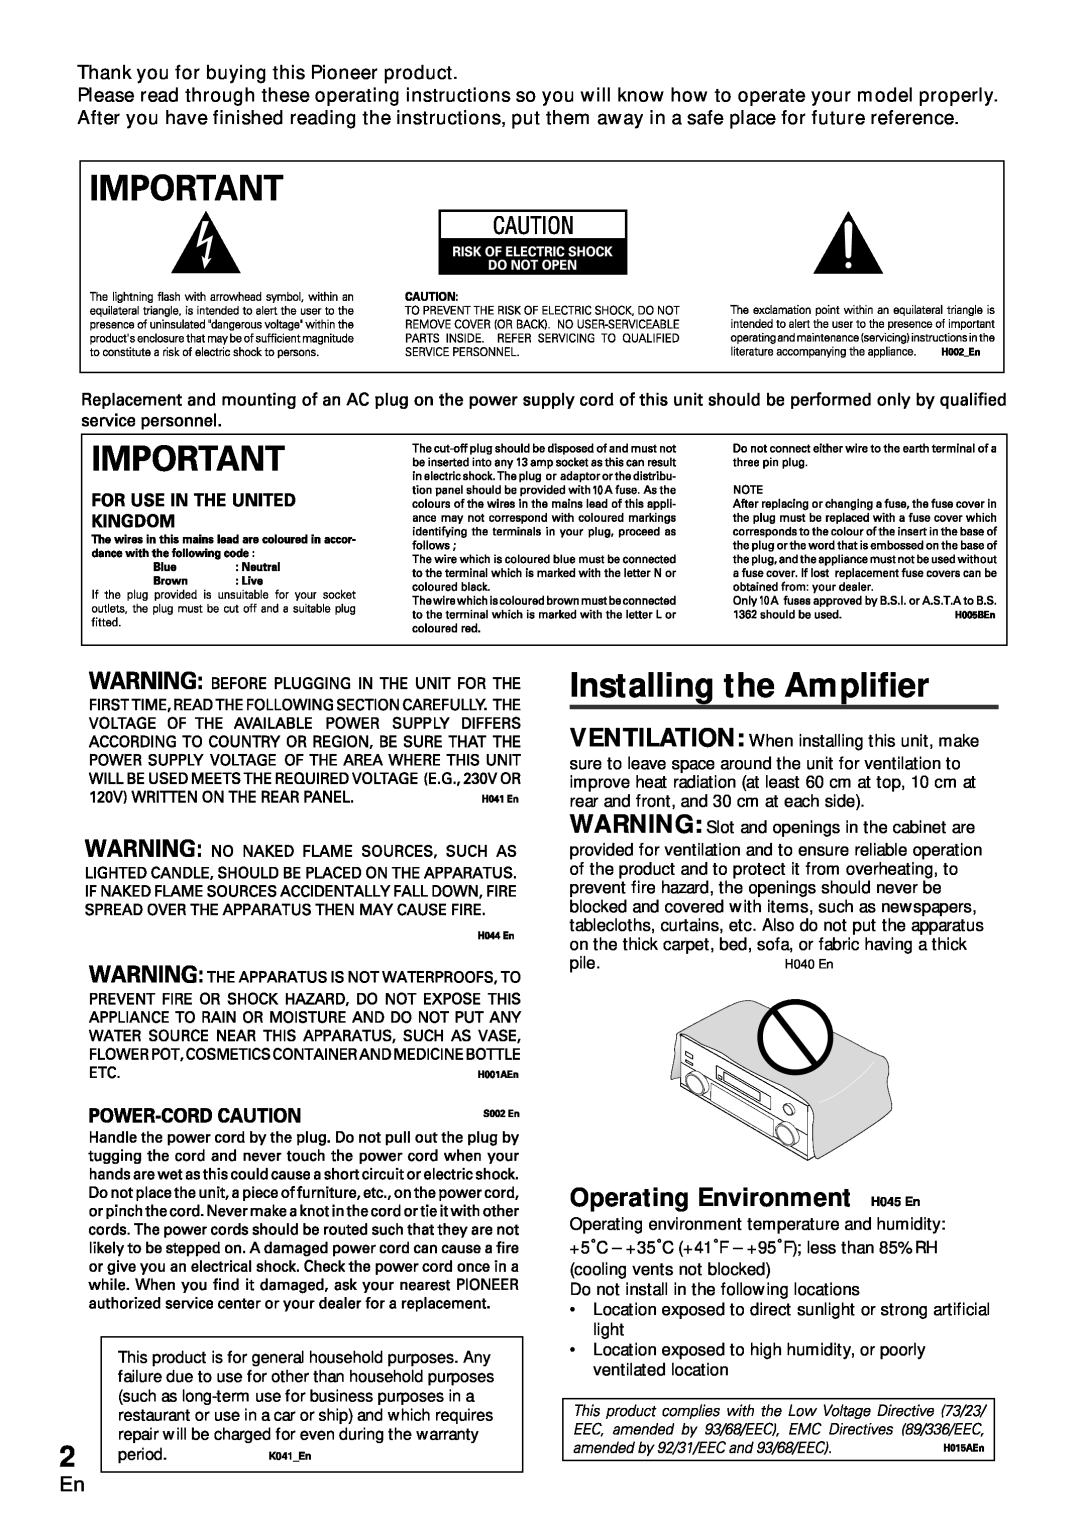 Pioneer VSA-AX10 operating instructions Installing the Amplifier, Operating Environment H045 En 